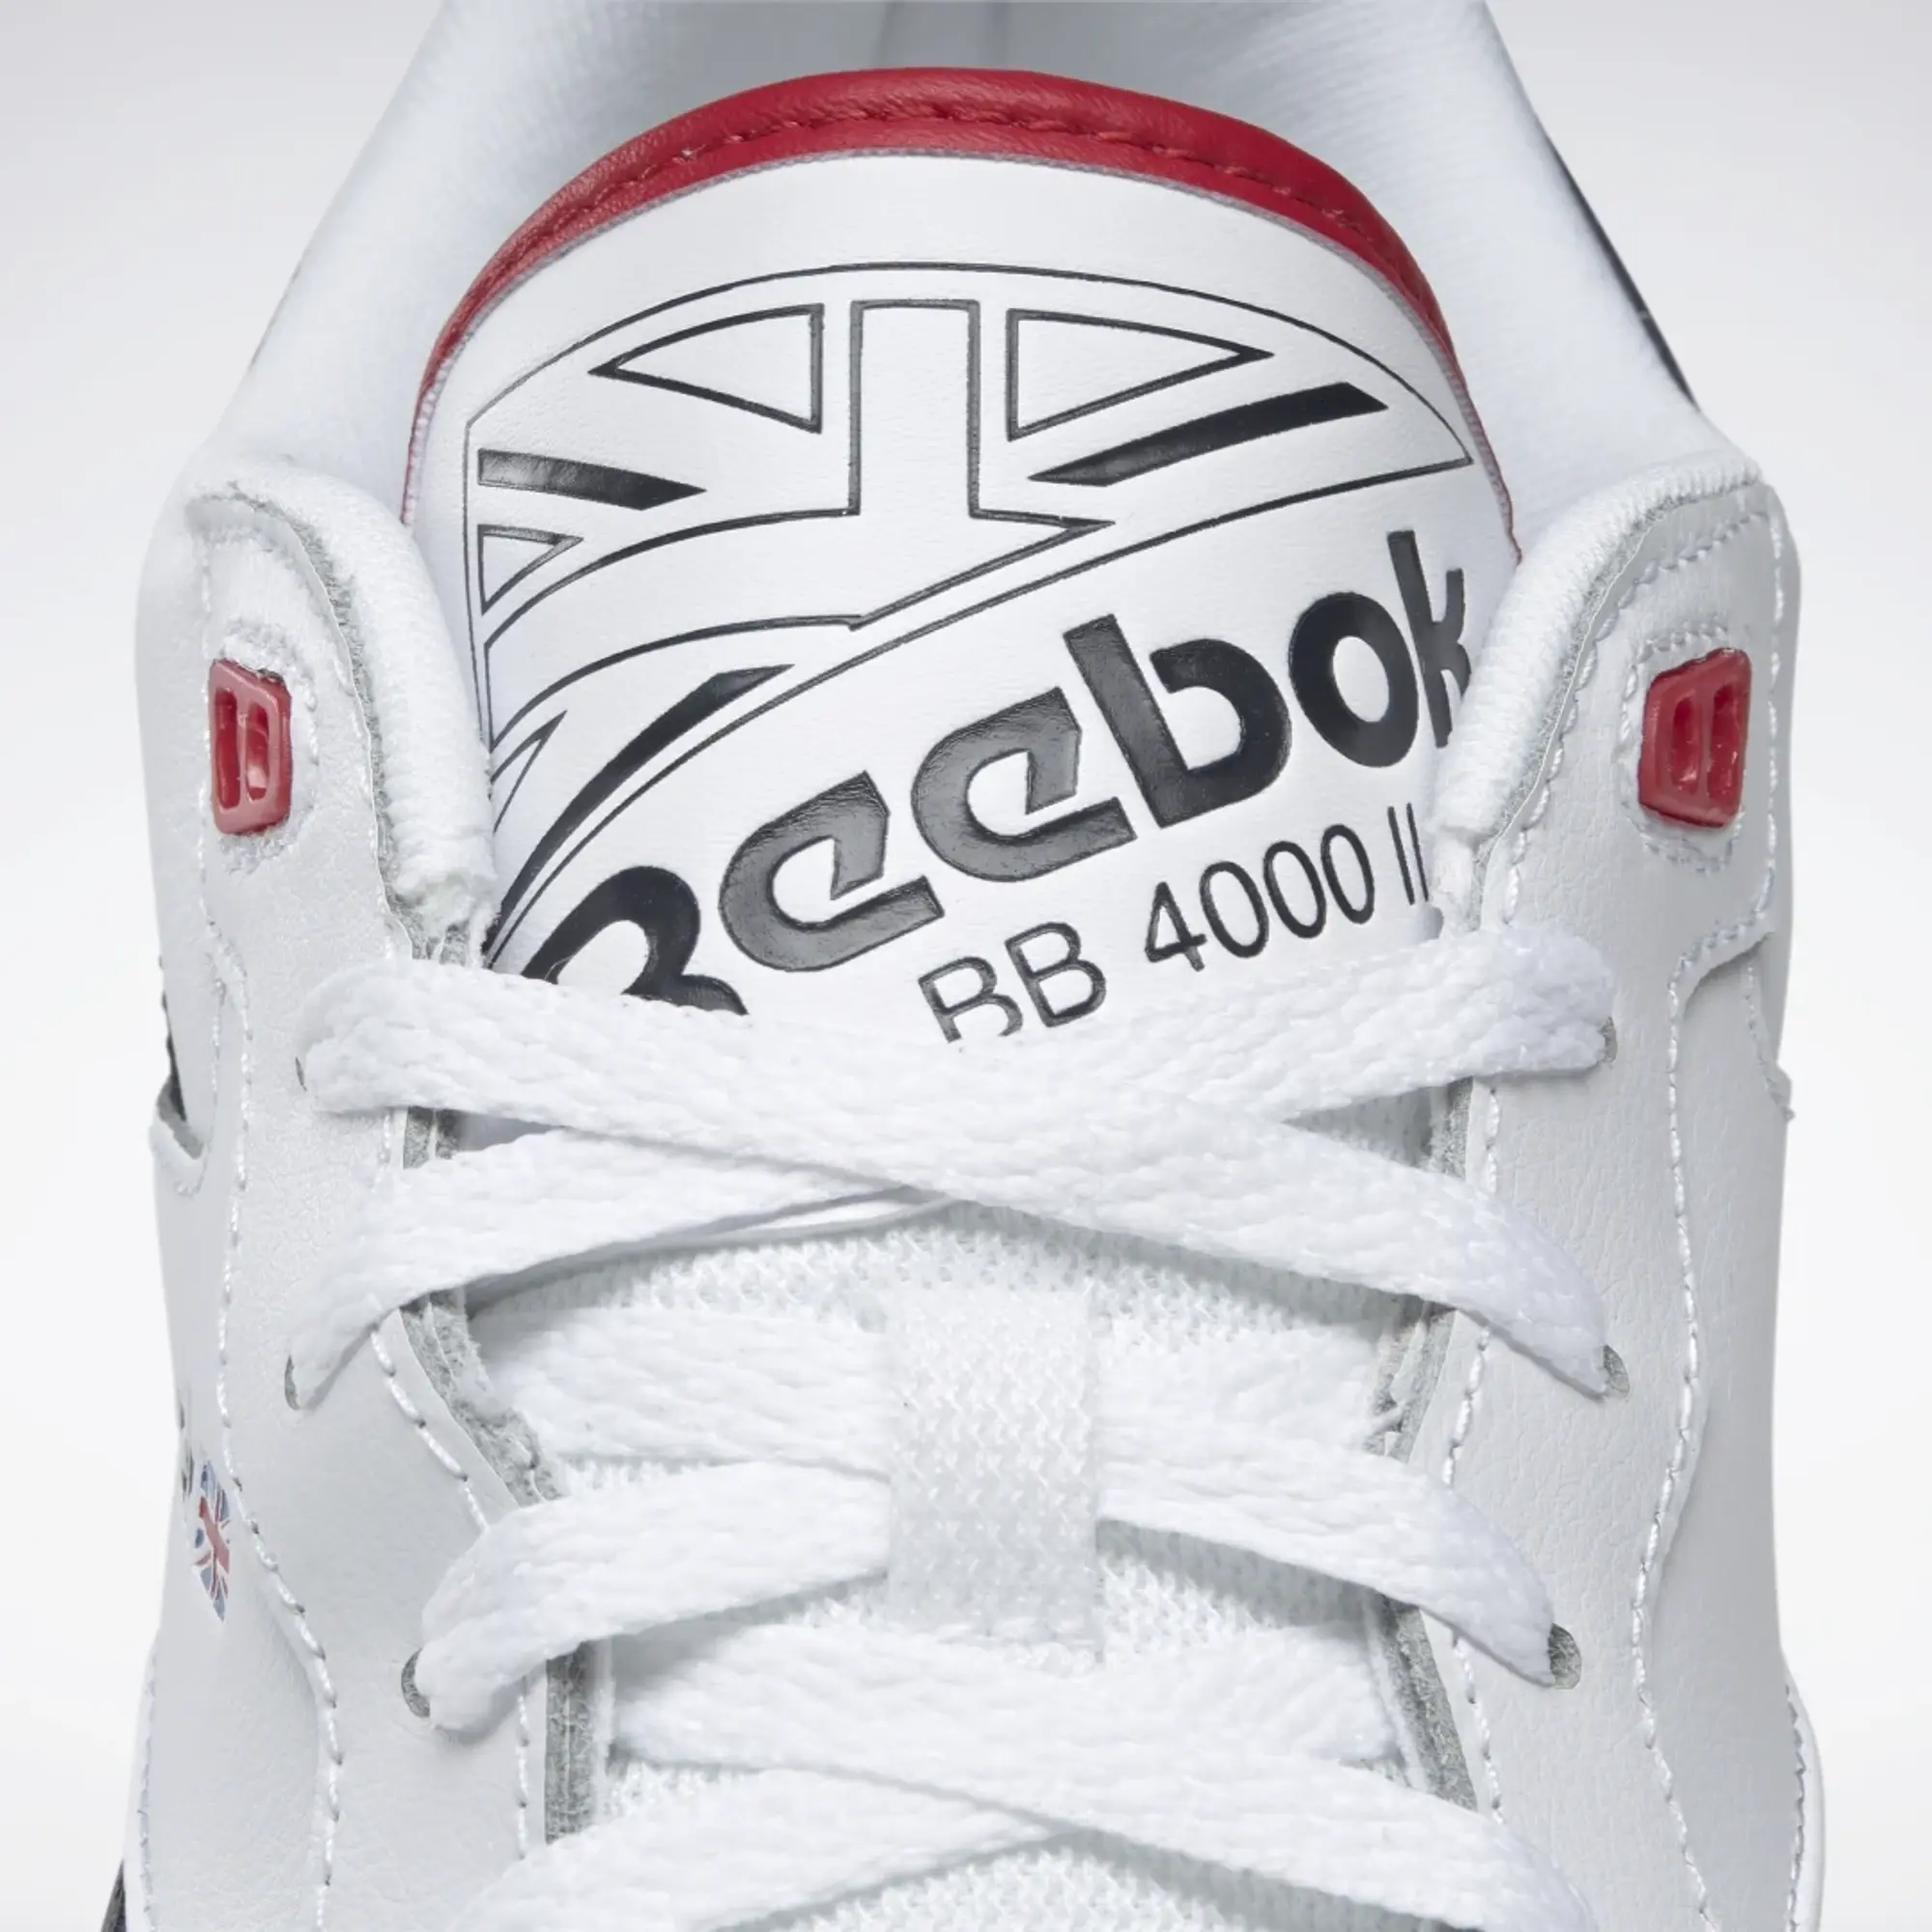 Reebok BB 4000 II Shoes - Cloud White / Vector Navy / Flash Red